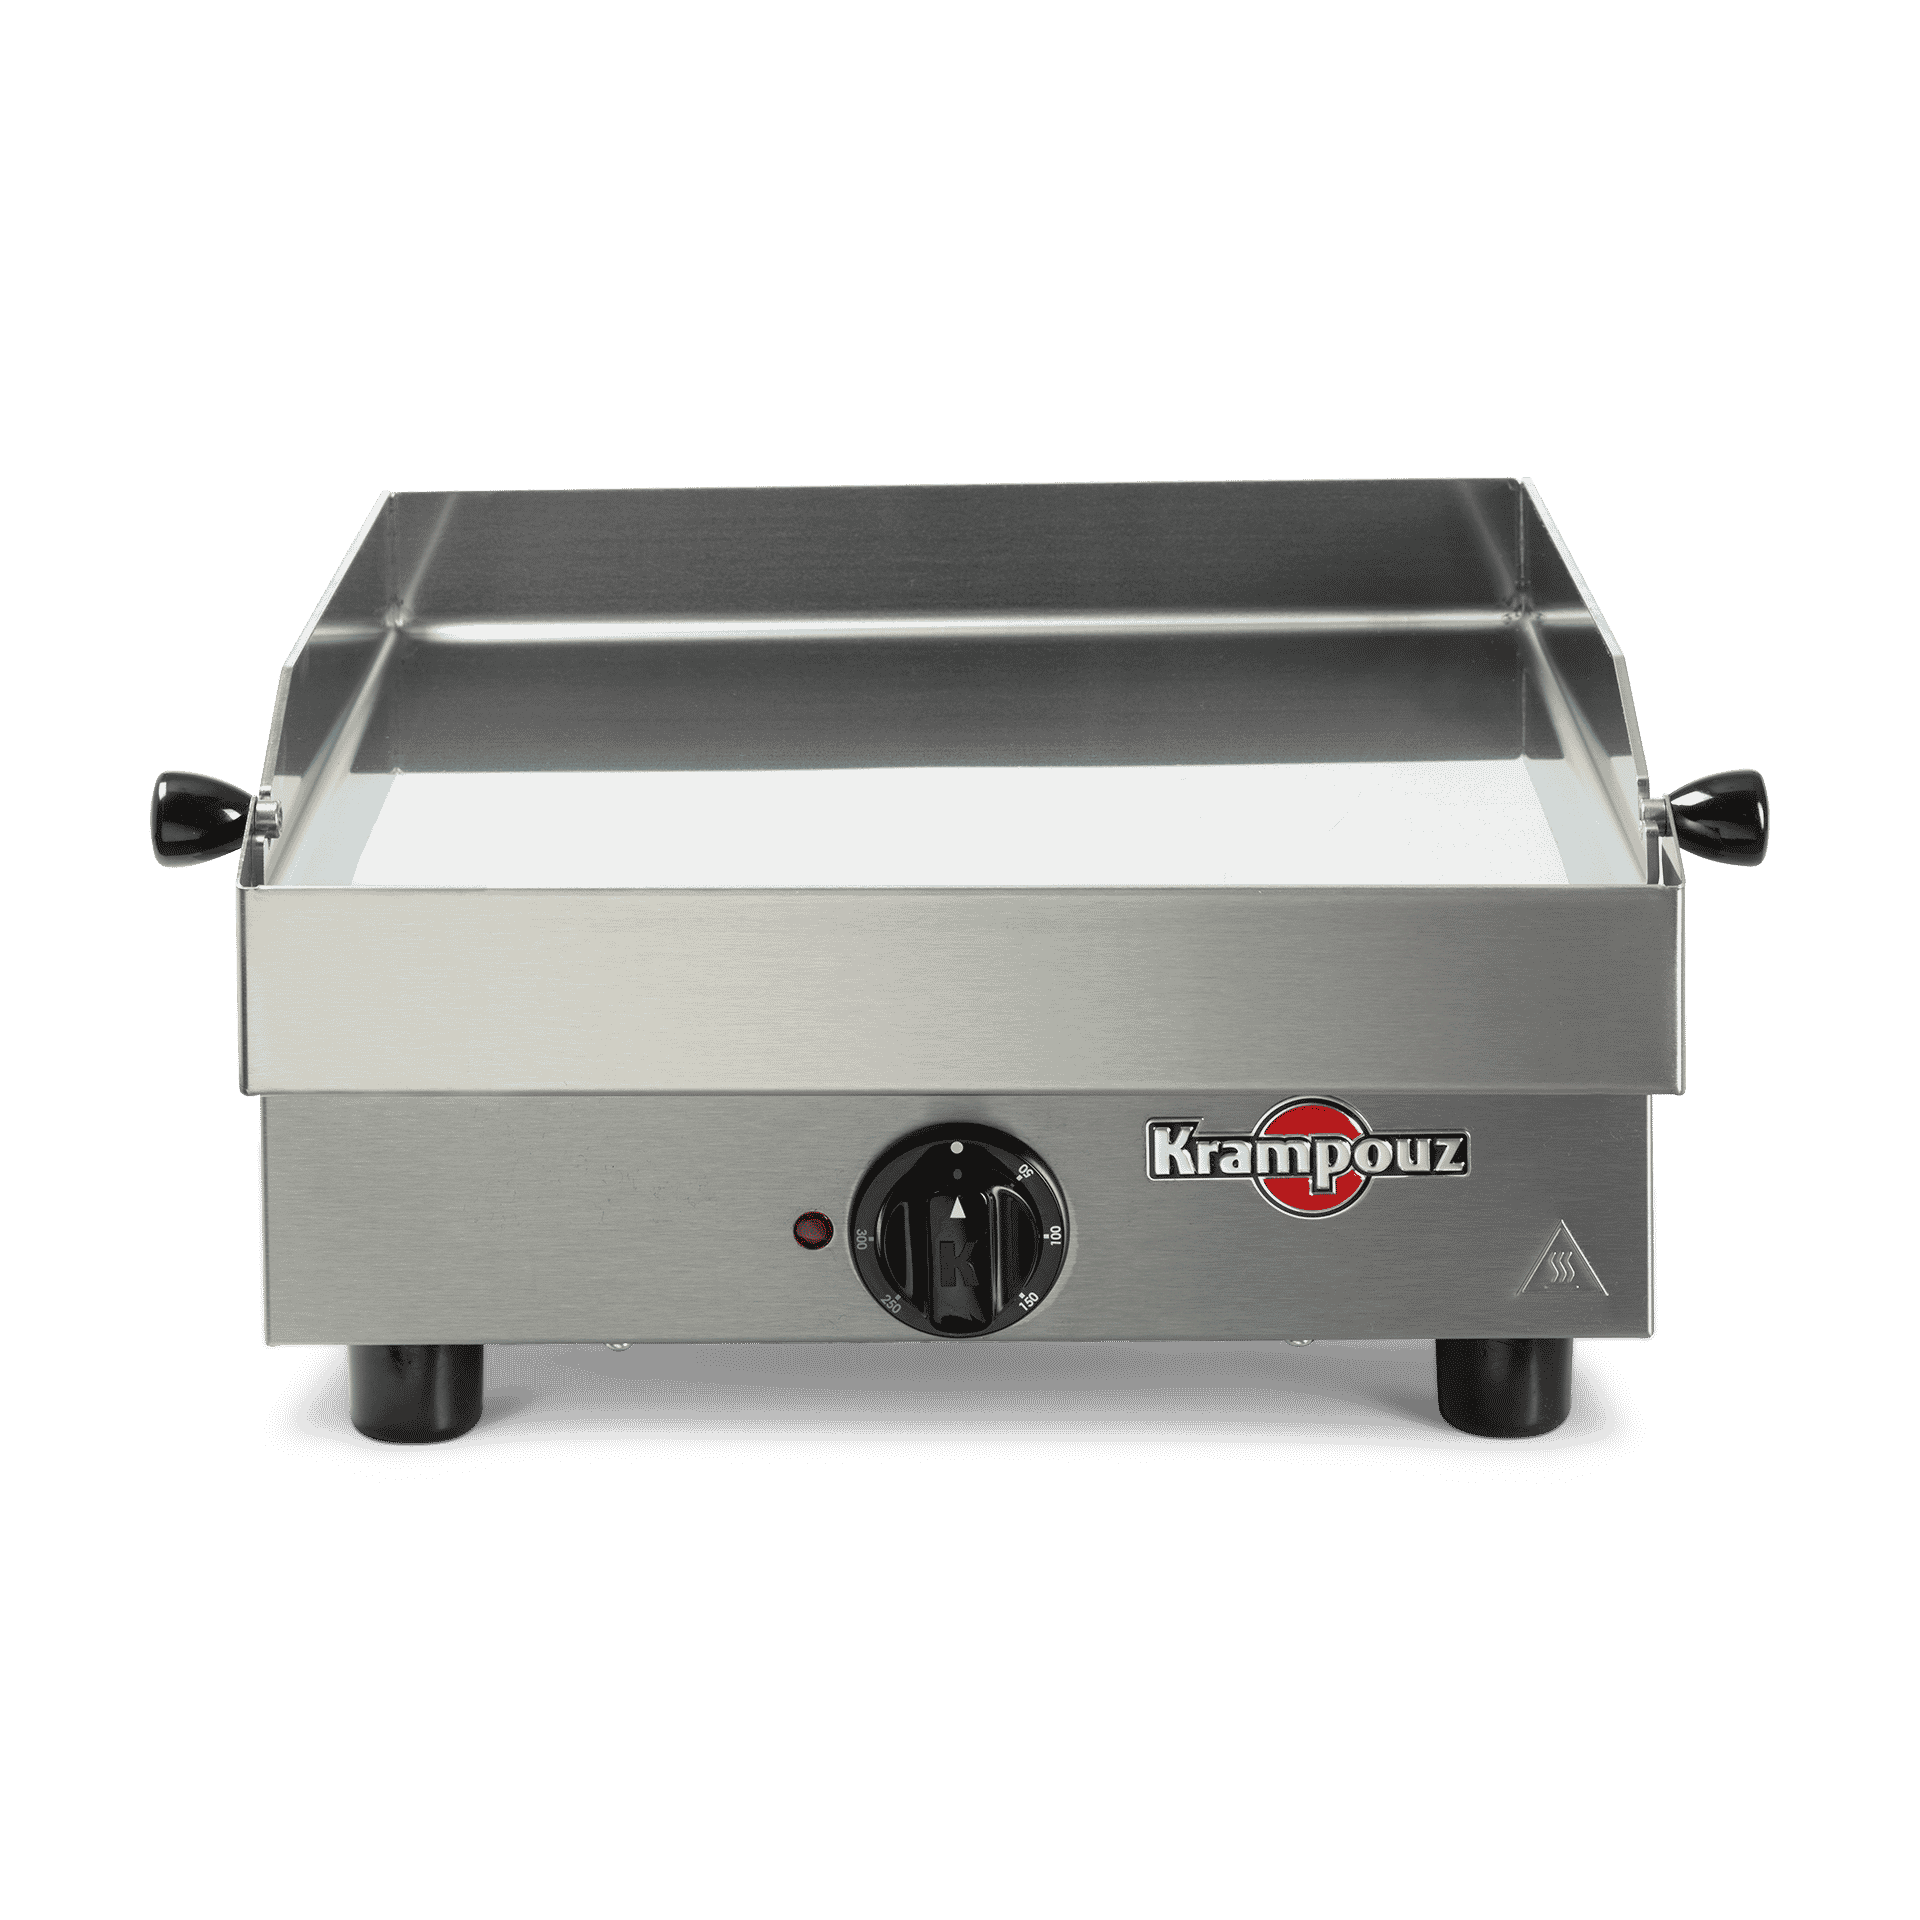 KRAMPOUZ Design Contact Grill tabletop Electric 1800 W Stainless Steel   barbecues & Grills 1800 W, contact Grill, Electric, tabletop, Griddle, Stainless Steel 